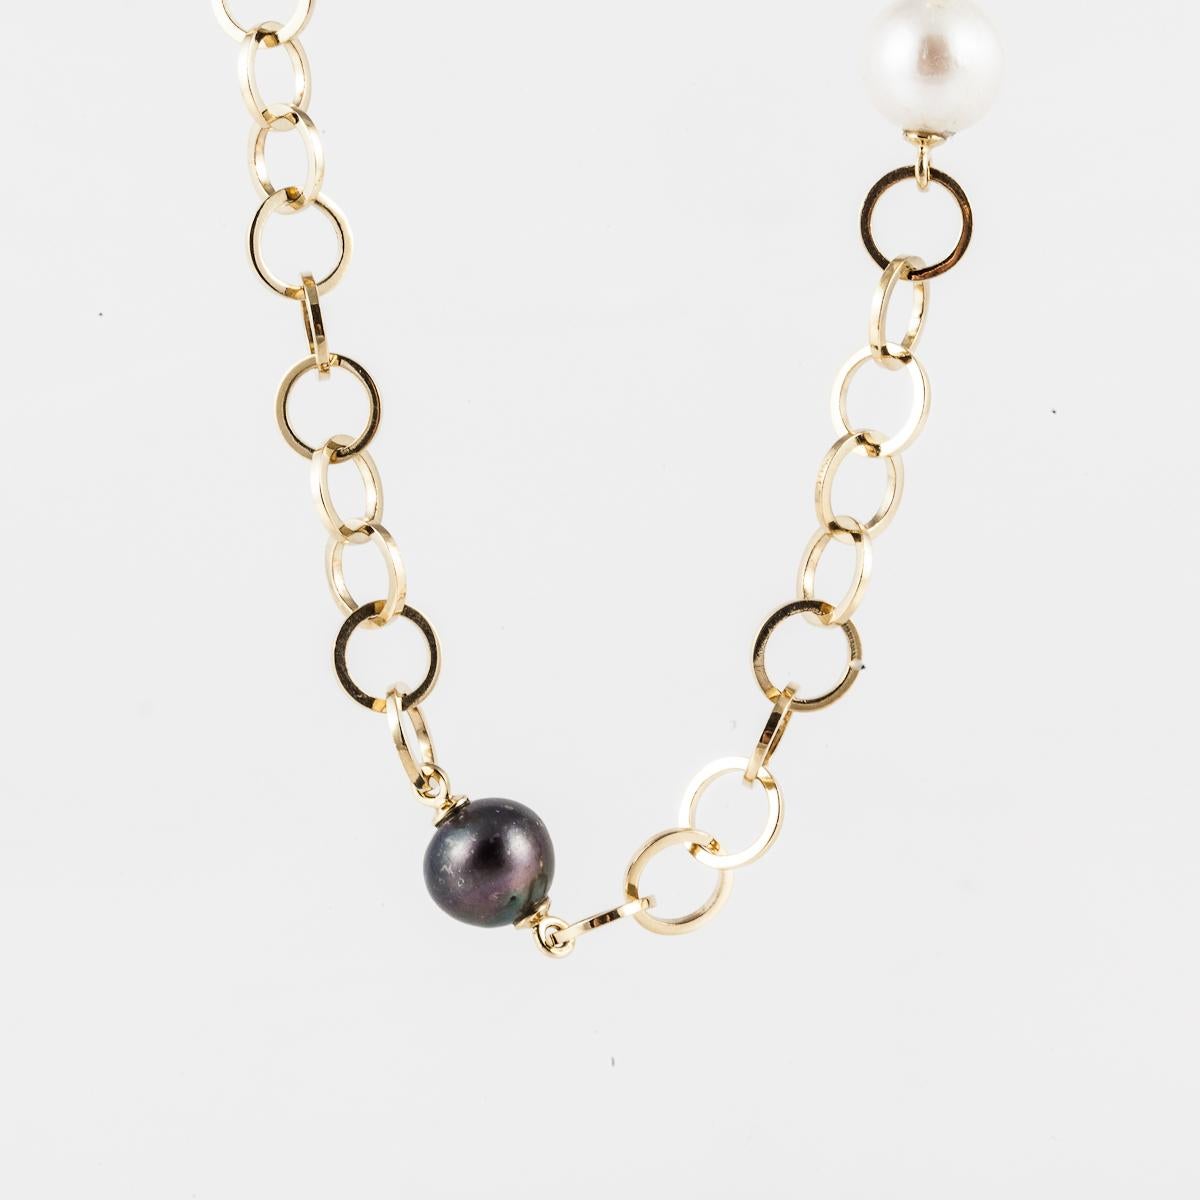 18K yellow gold necklace with interlocking circle links.  Interspersed are five white cultured pearls and five Tahitian black pearls that measure 10mm.  Necklace measures 31 inches in length and the links are 3/8 inches wide.